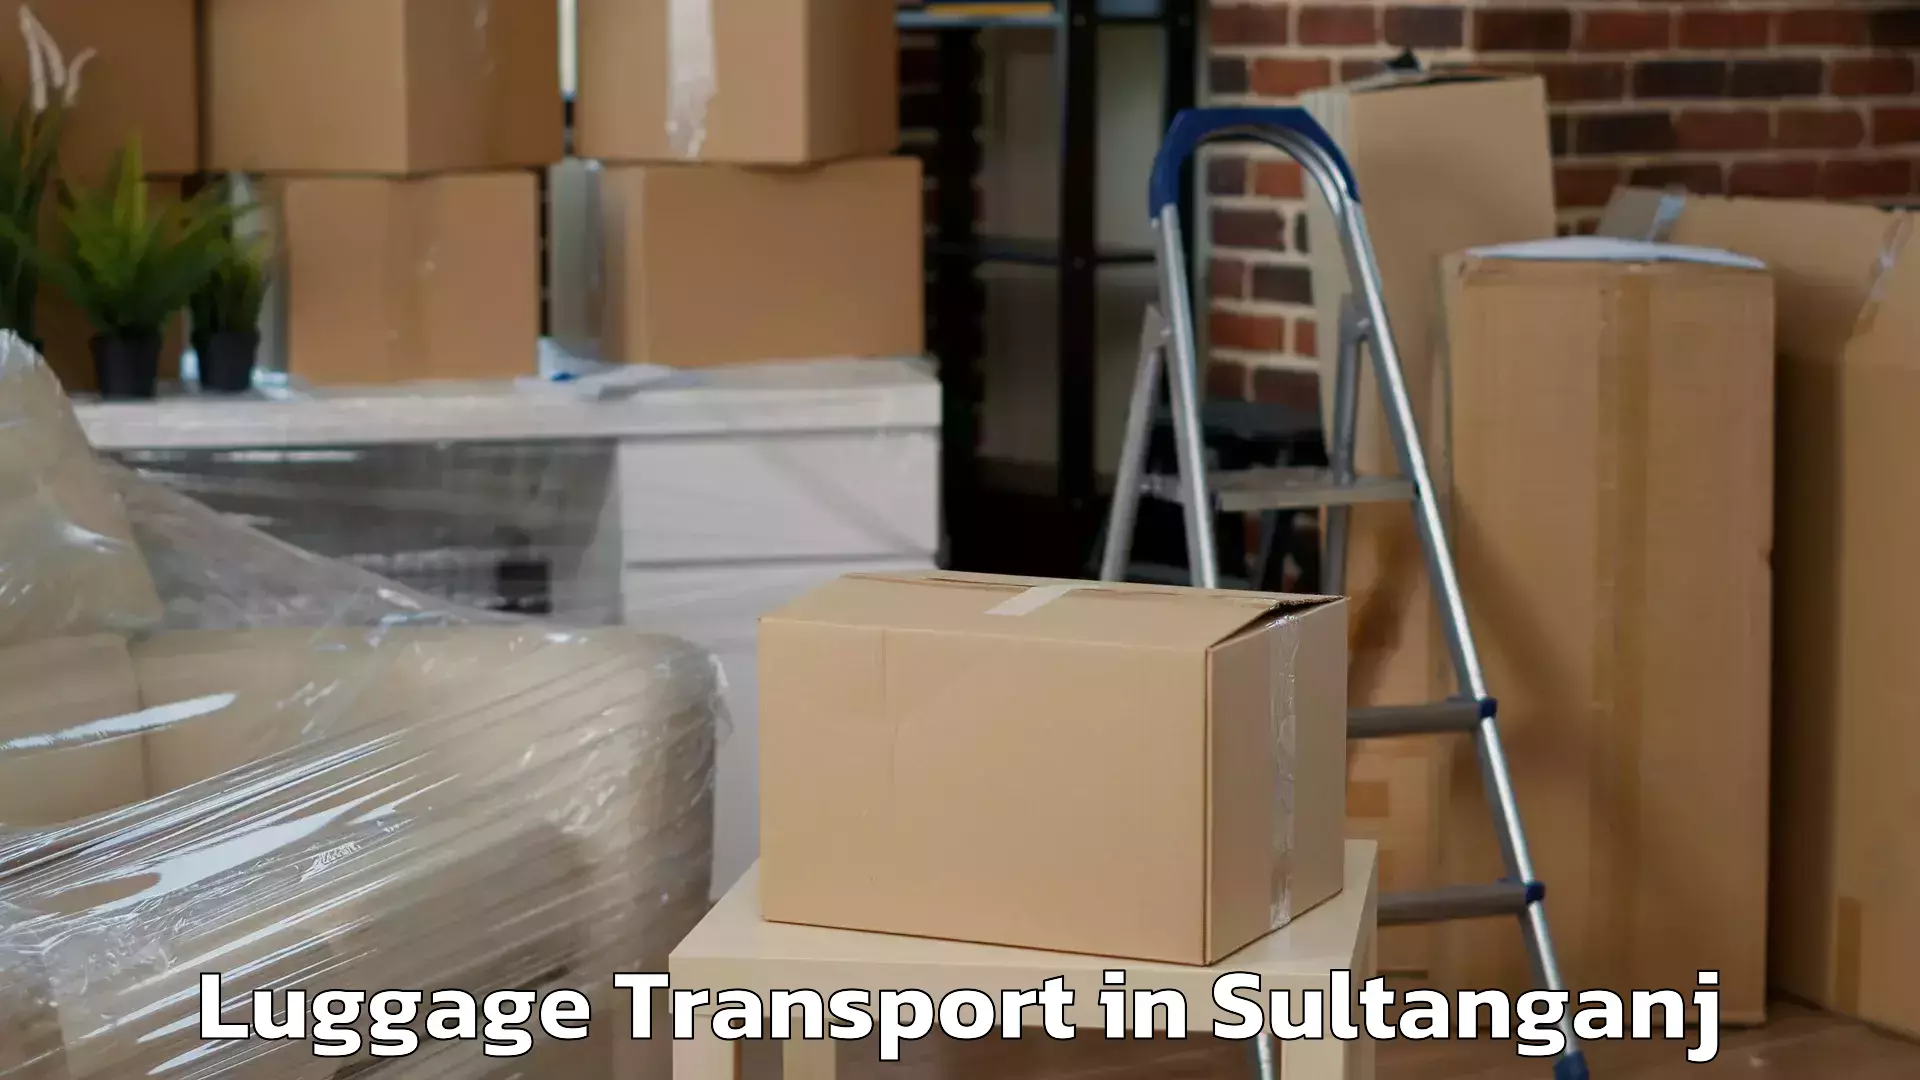 Luggage dispatch service in Sultanganj